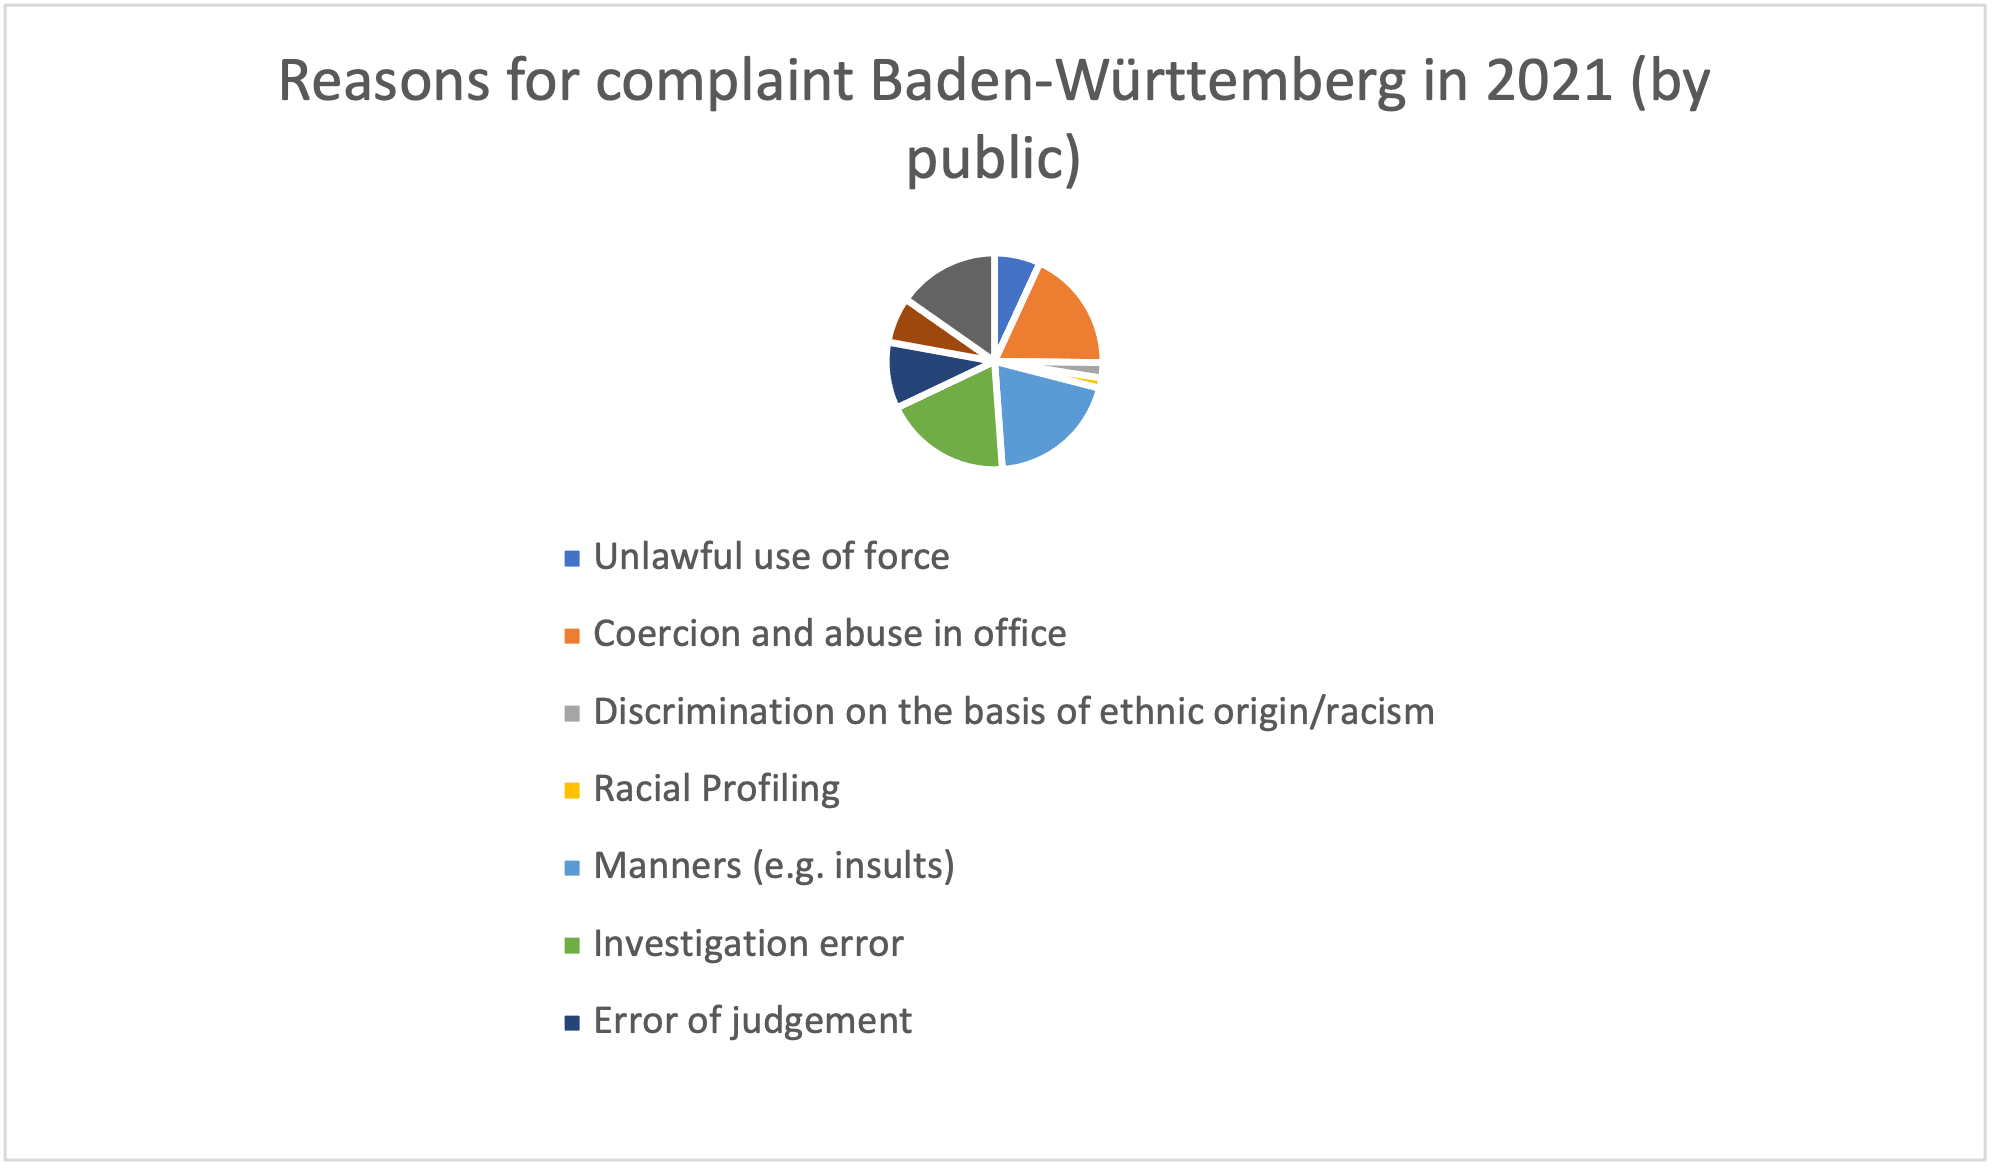 Germany InfoGraphic 6 - Reasons for complaints in Baden-Württemberg by type in 2021